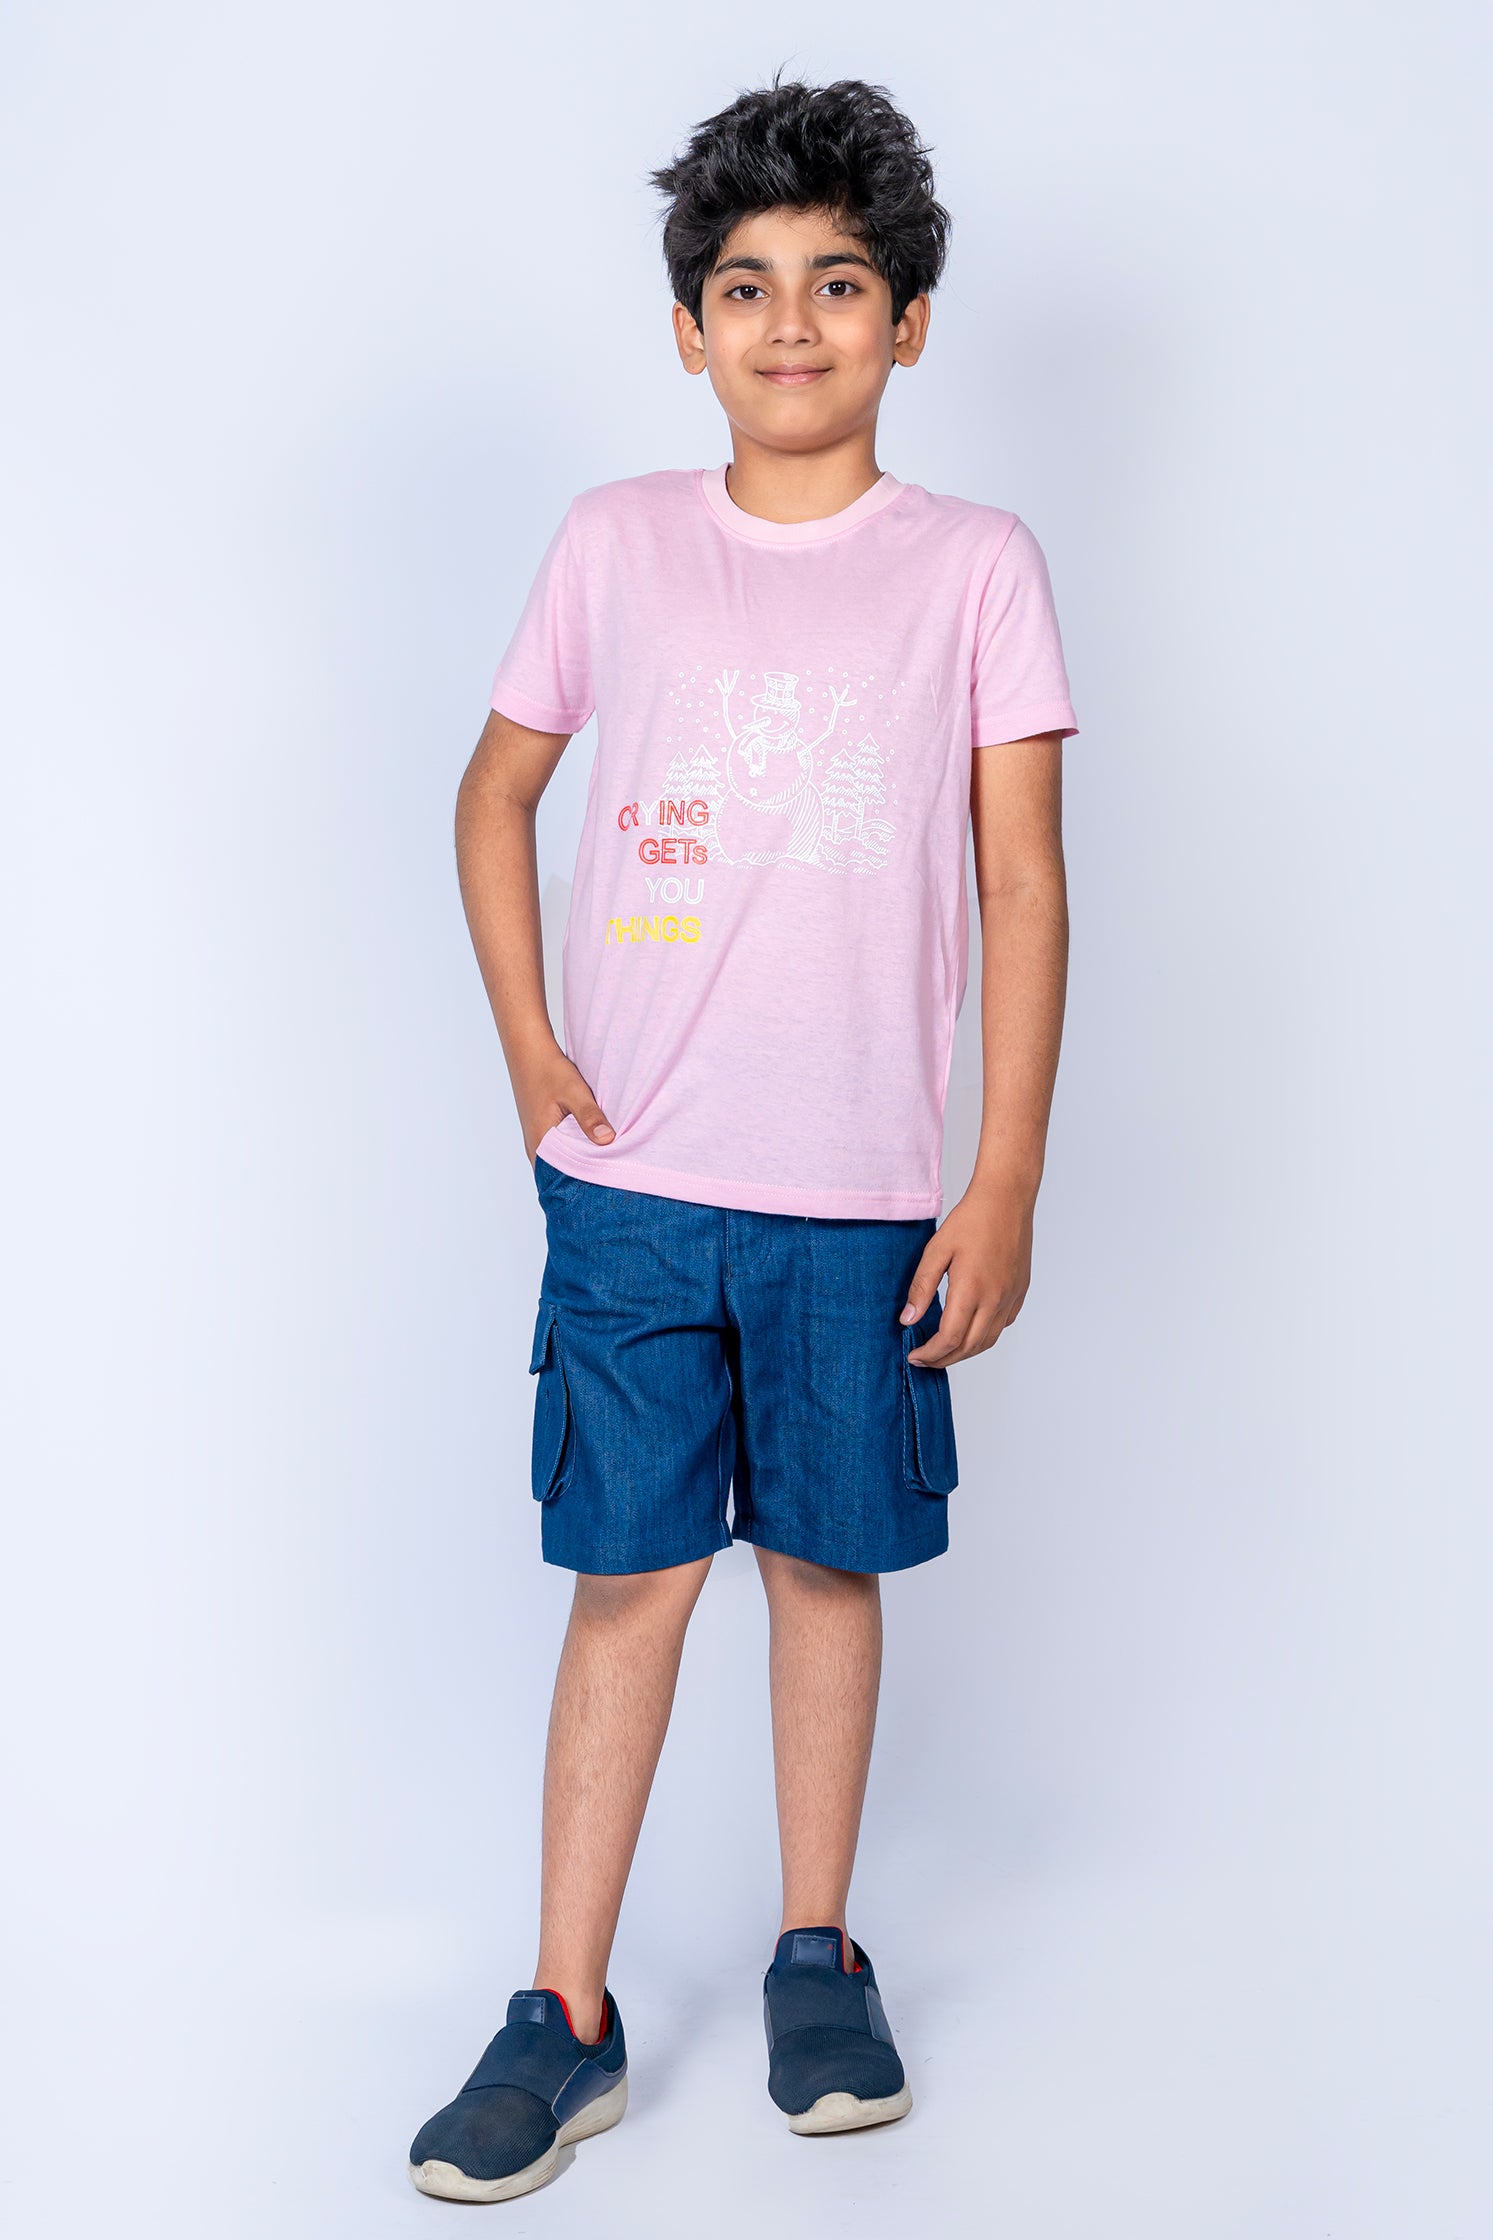 BOYS T-SHIRT PINK WITH "CRYING GETS YOU THINK" PRINTING